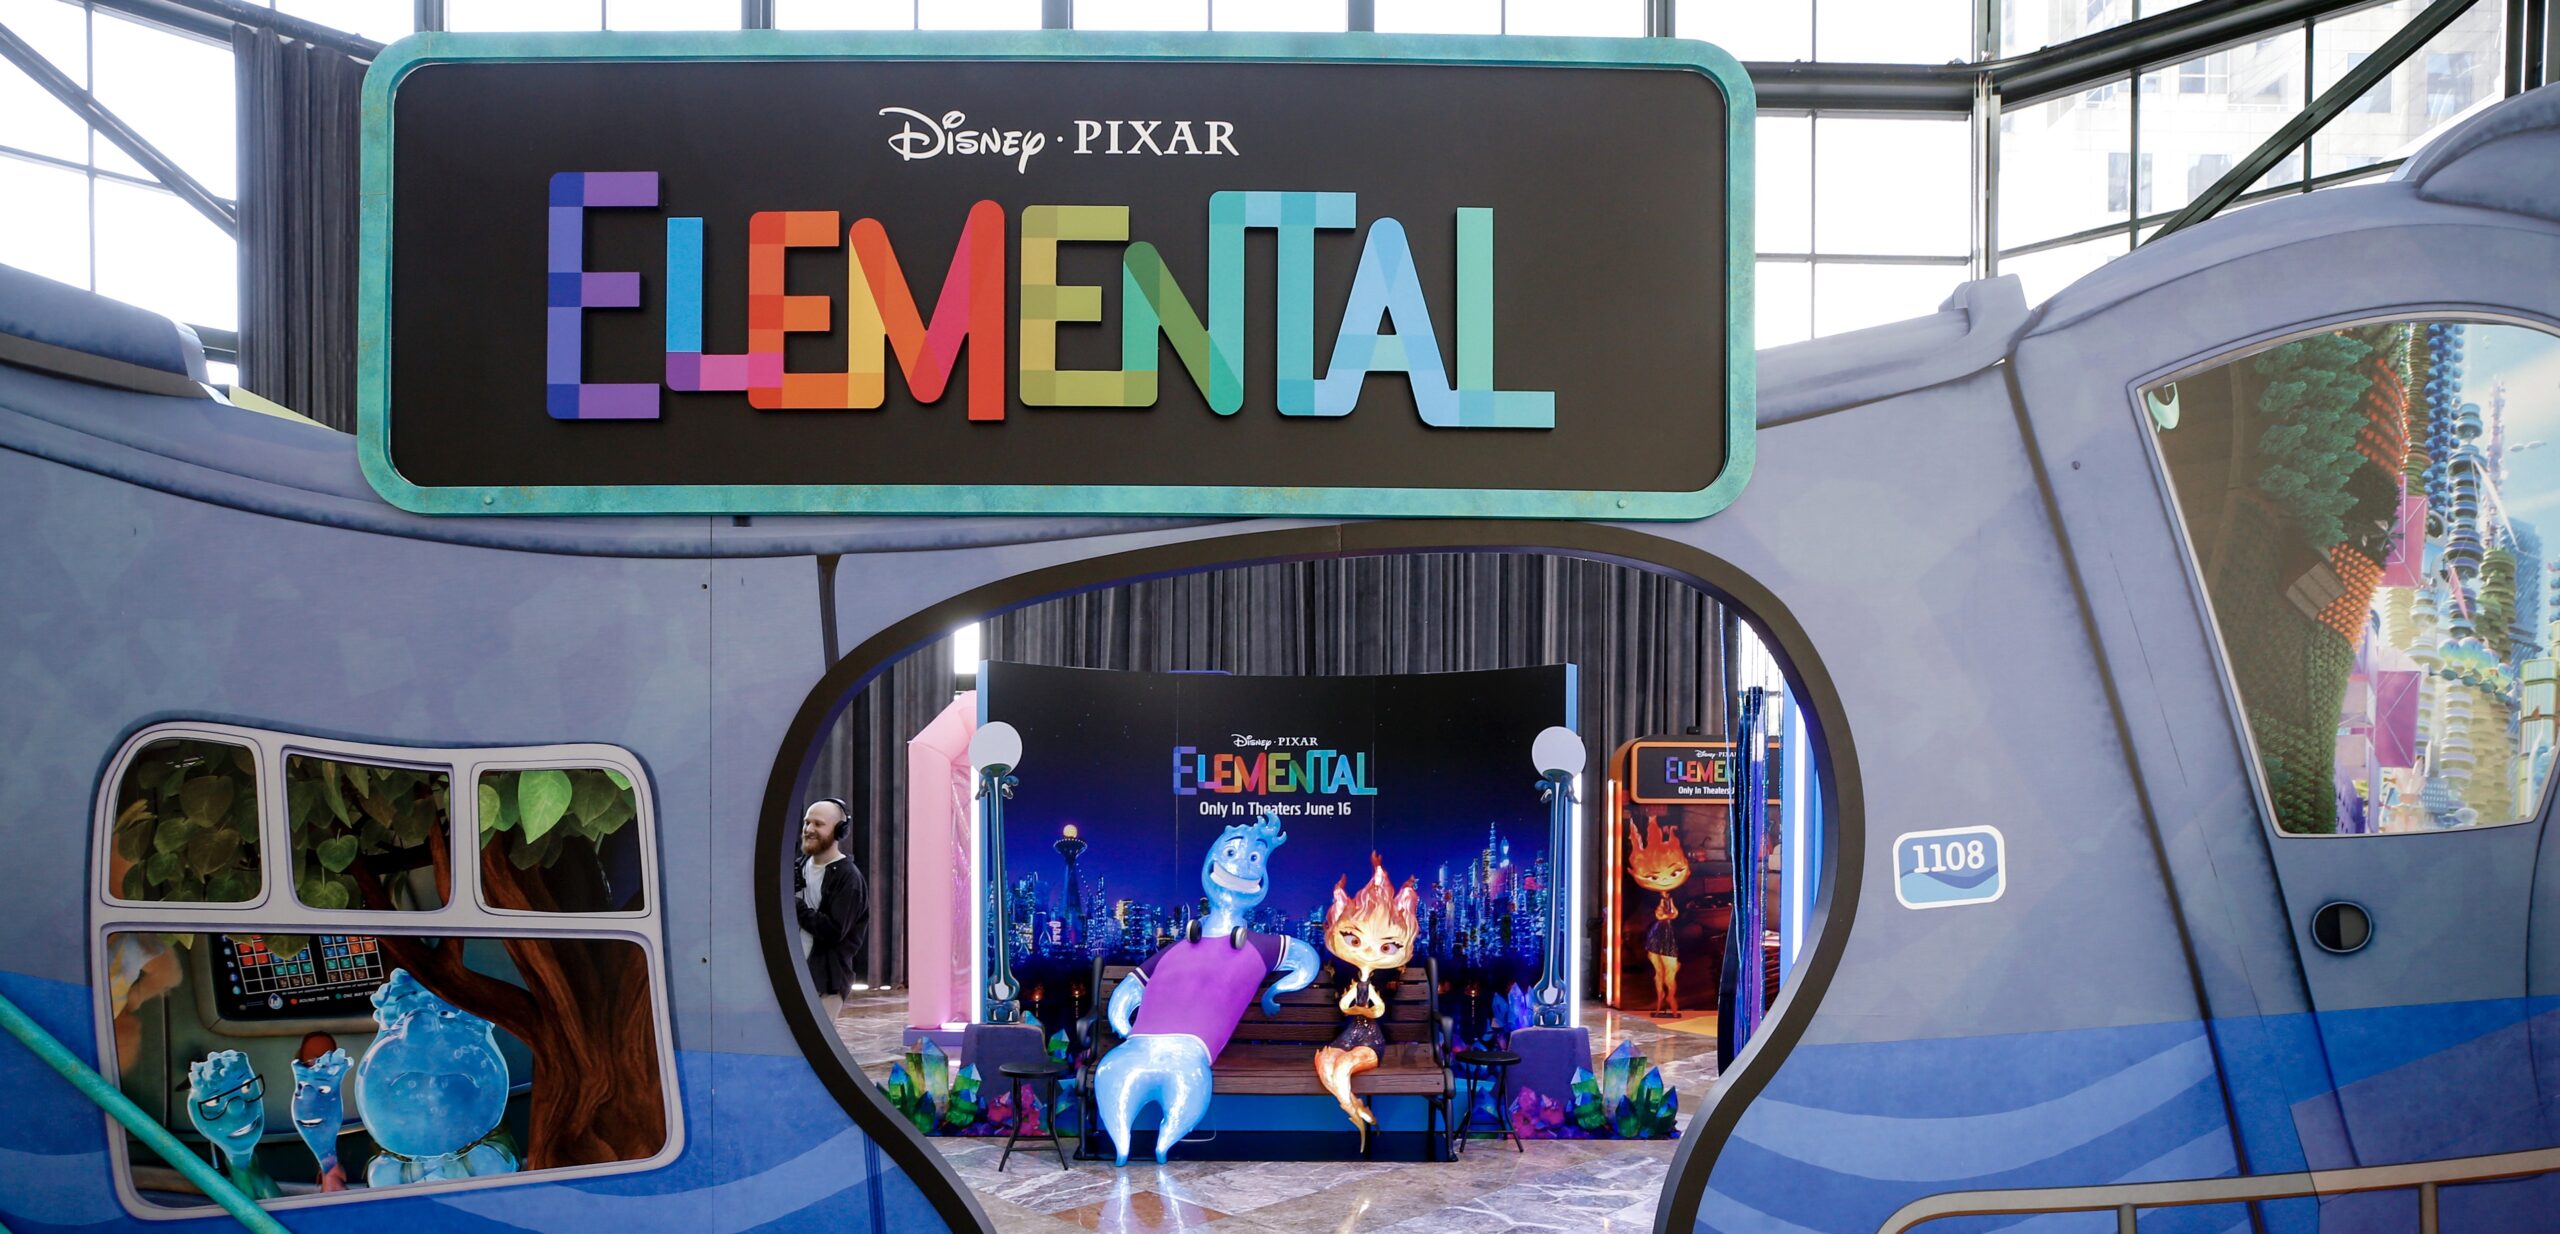 Disney and Pixar's Elemental Experience Embarks on Multi-City Mall Tour, NYC is First Stop!